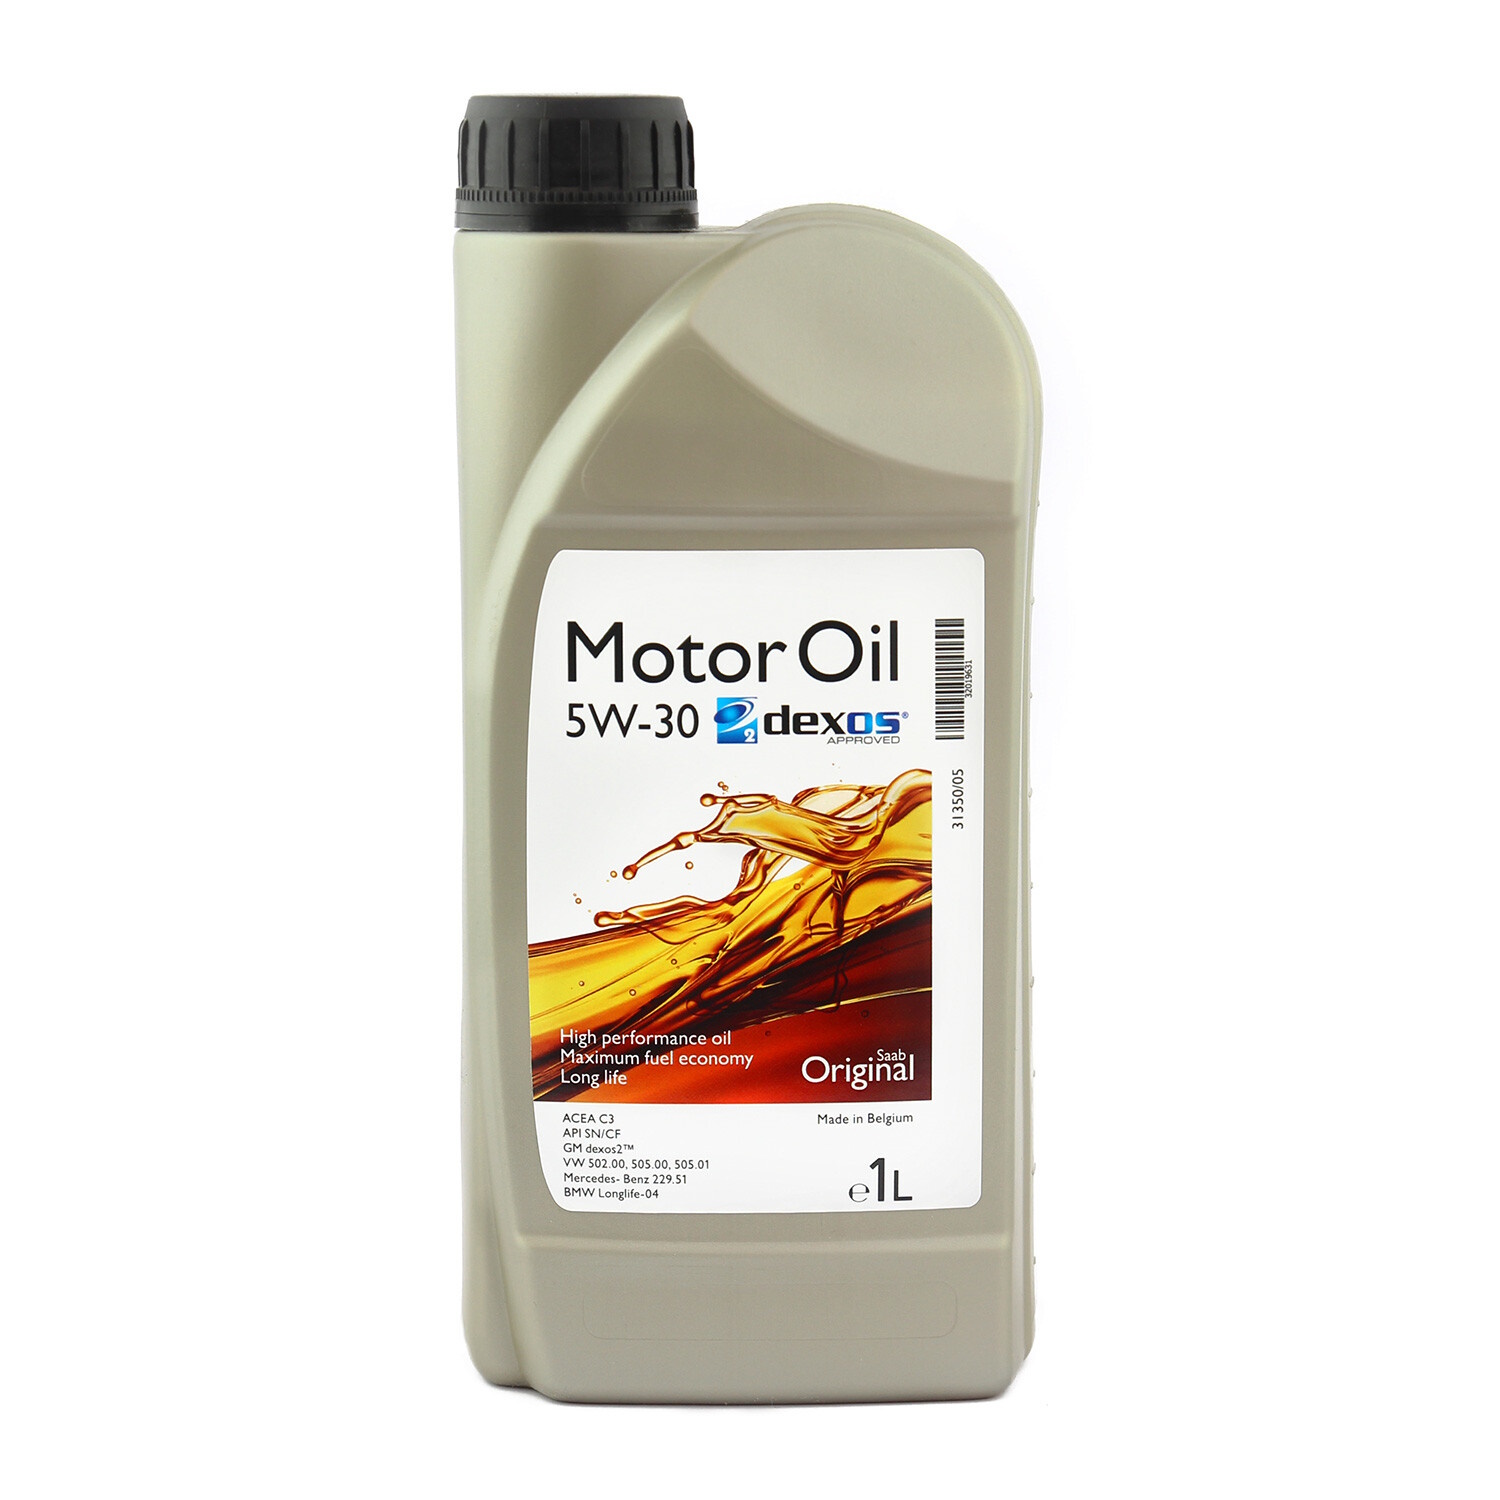 Engine oil dexos 2 for Opel - Oil with GM approval